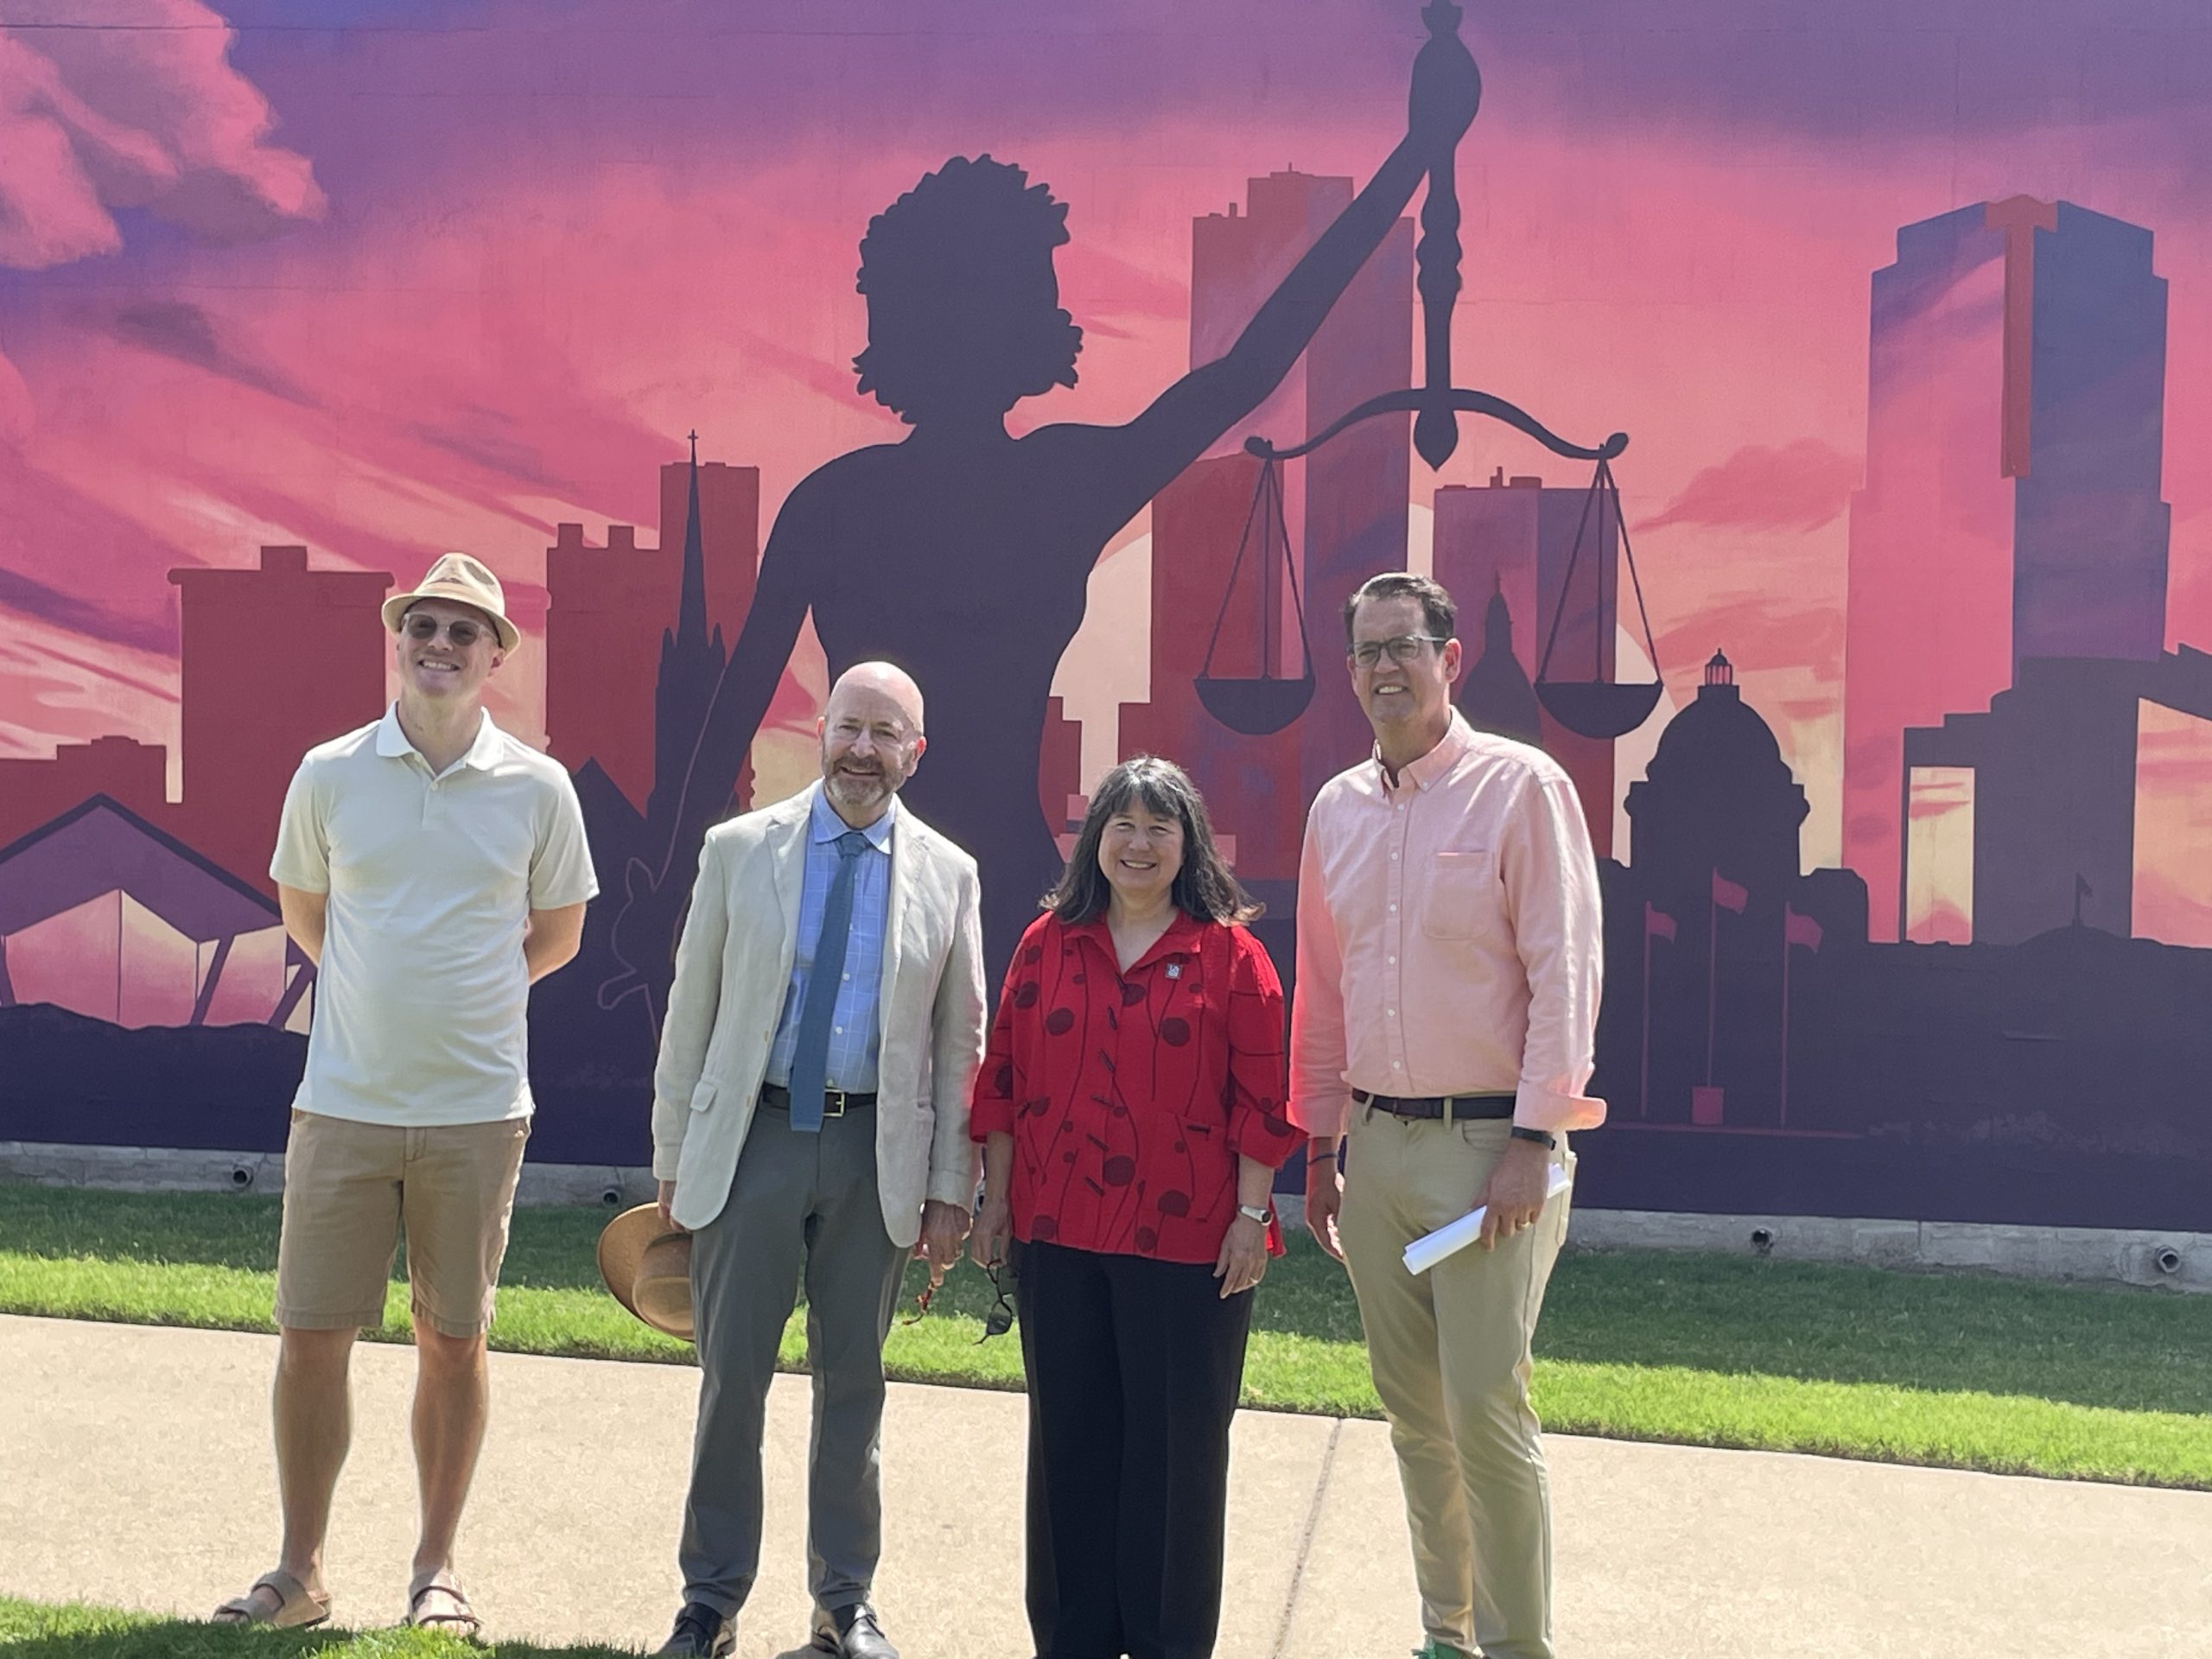 Officials celebrate the dedication of the new "Lady Justice" mural at the William H. Bowen School of Law. From left: Mural Artist Joel Boyd, Bowen Dean Colin Crawford, UA Little Rock Chancellor Christina Drale, and Gabe Holmstrom, executive director of the Downtown Little Rock Partnership.